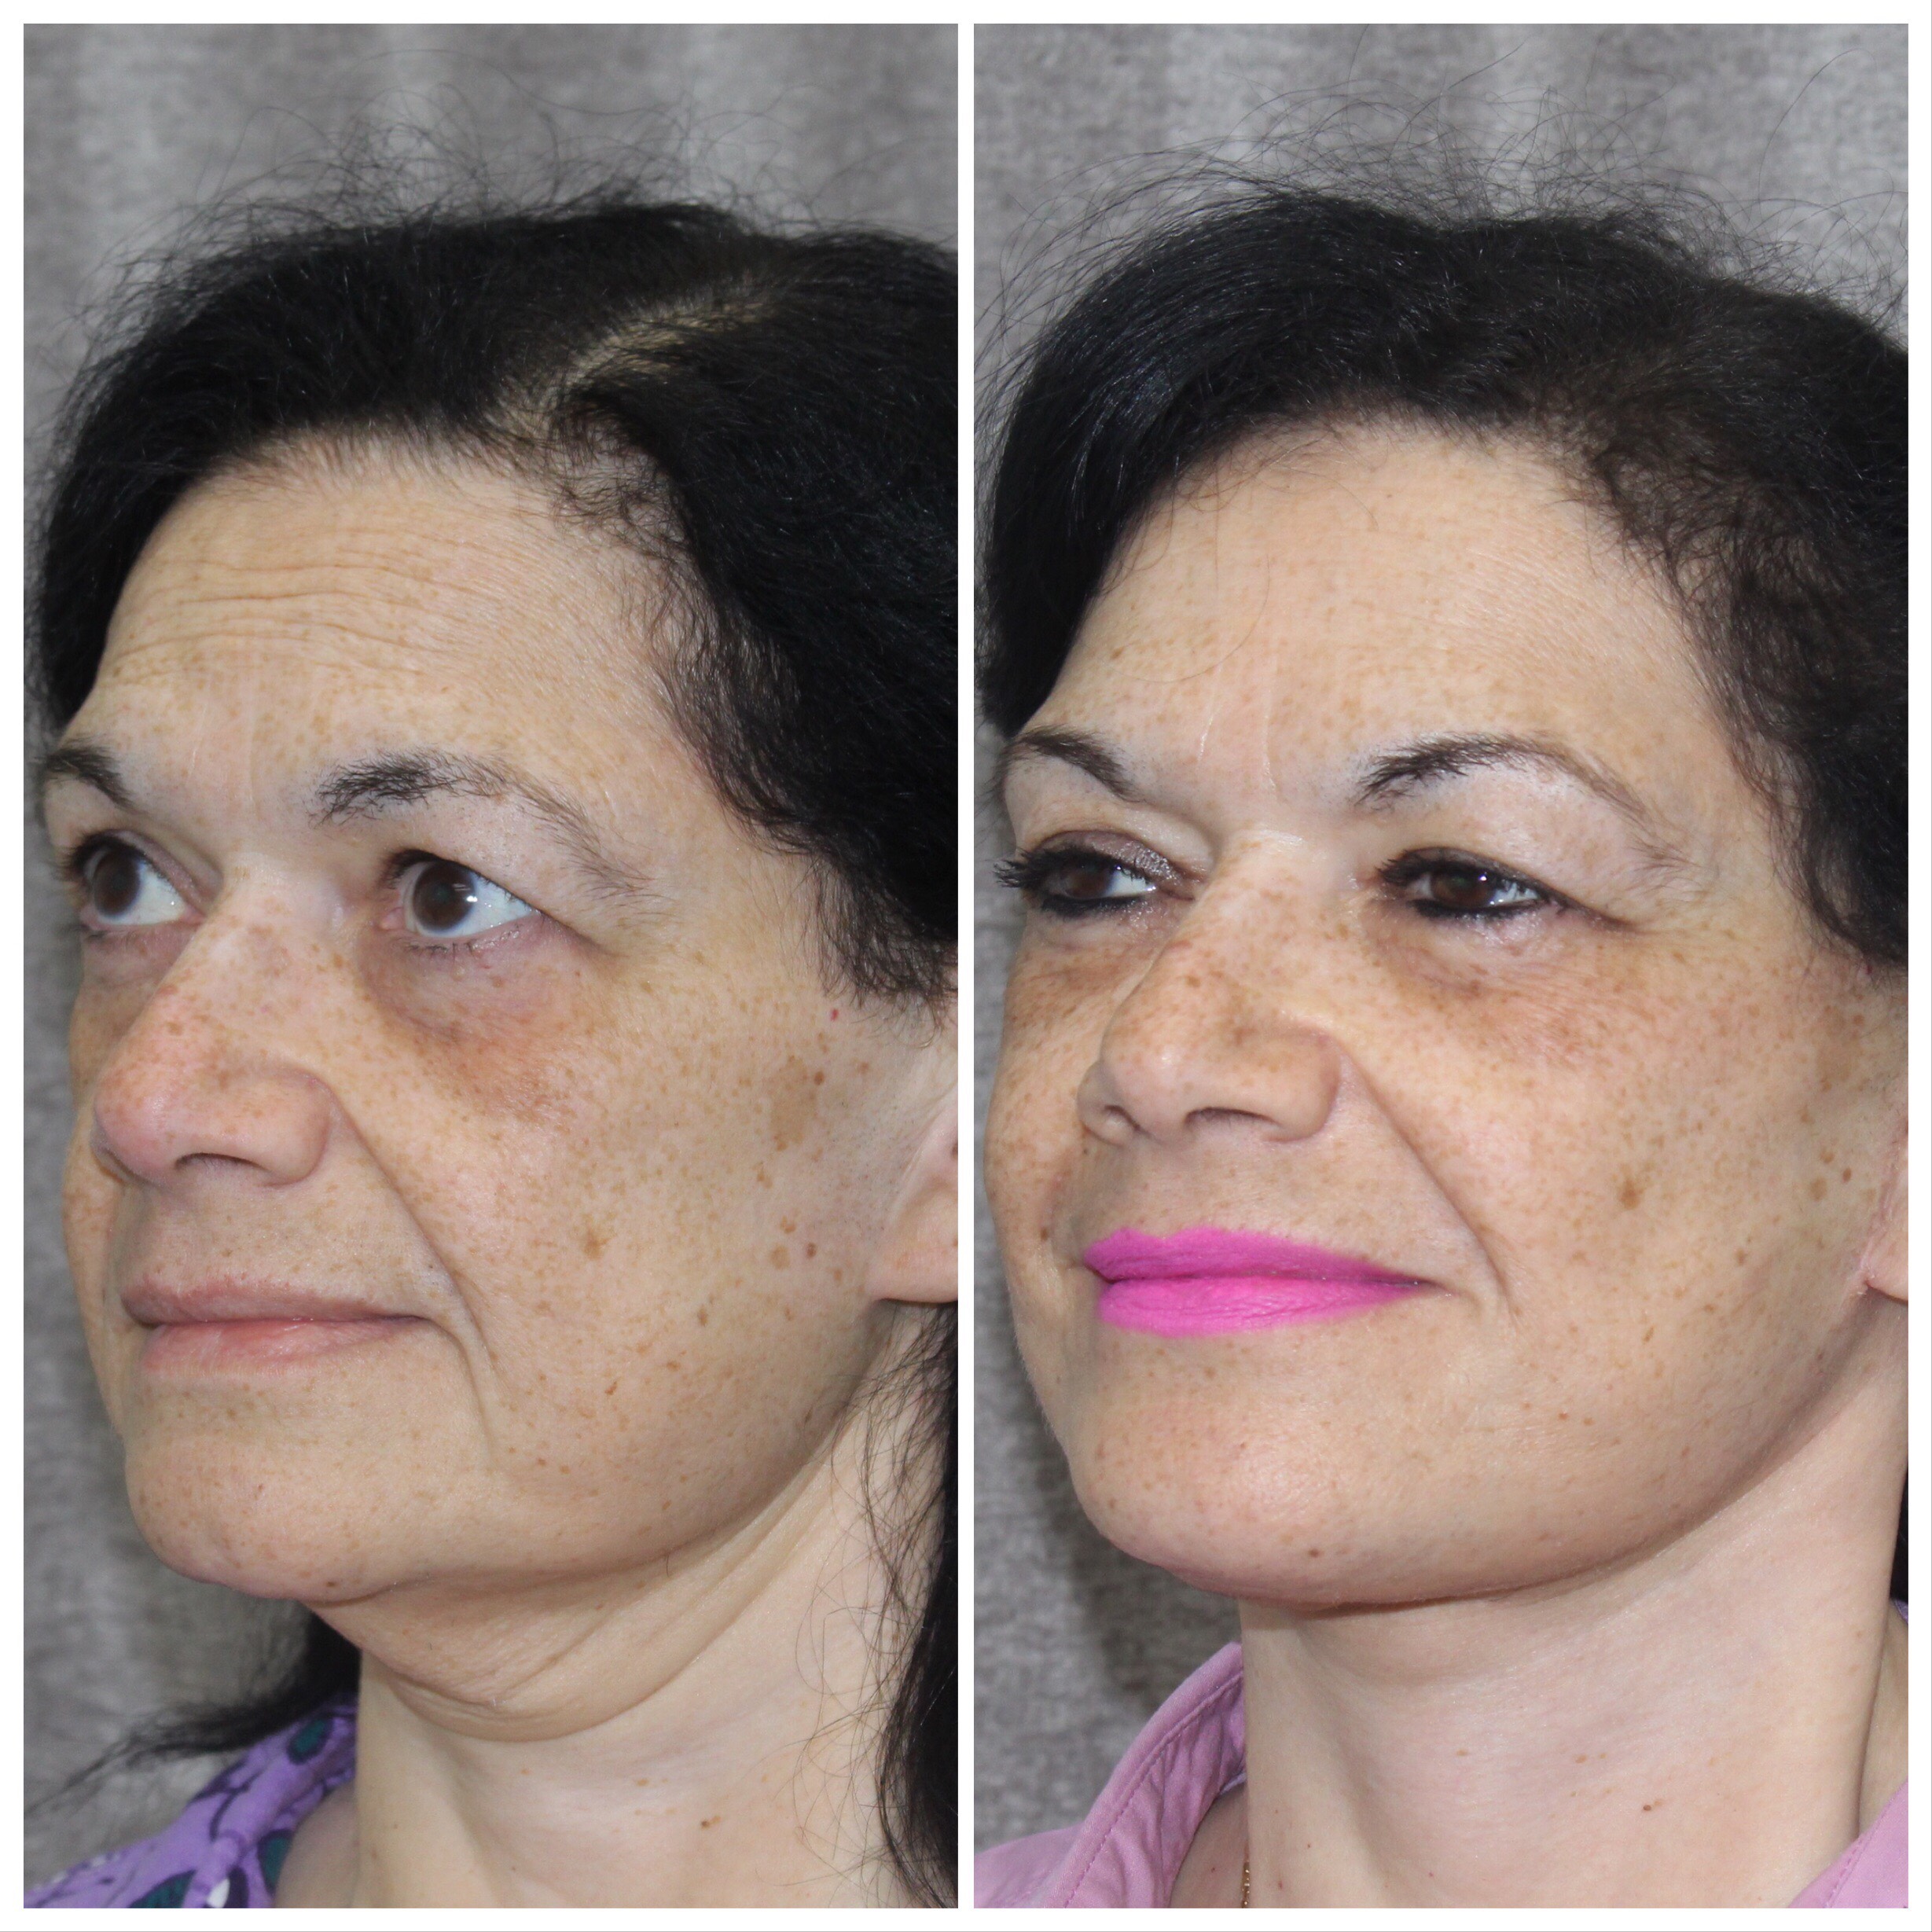 Before and After Facelift in Long Island patient from Dr. Doshi 02